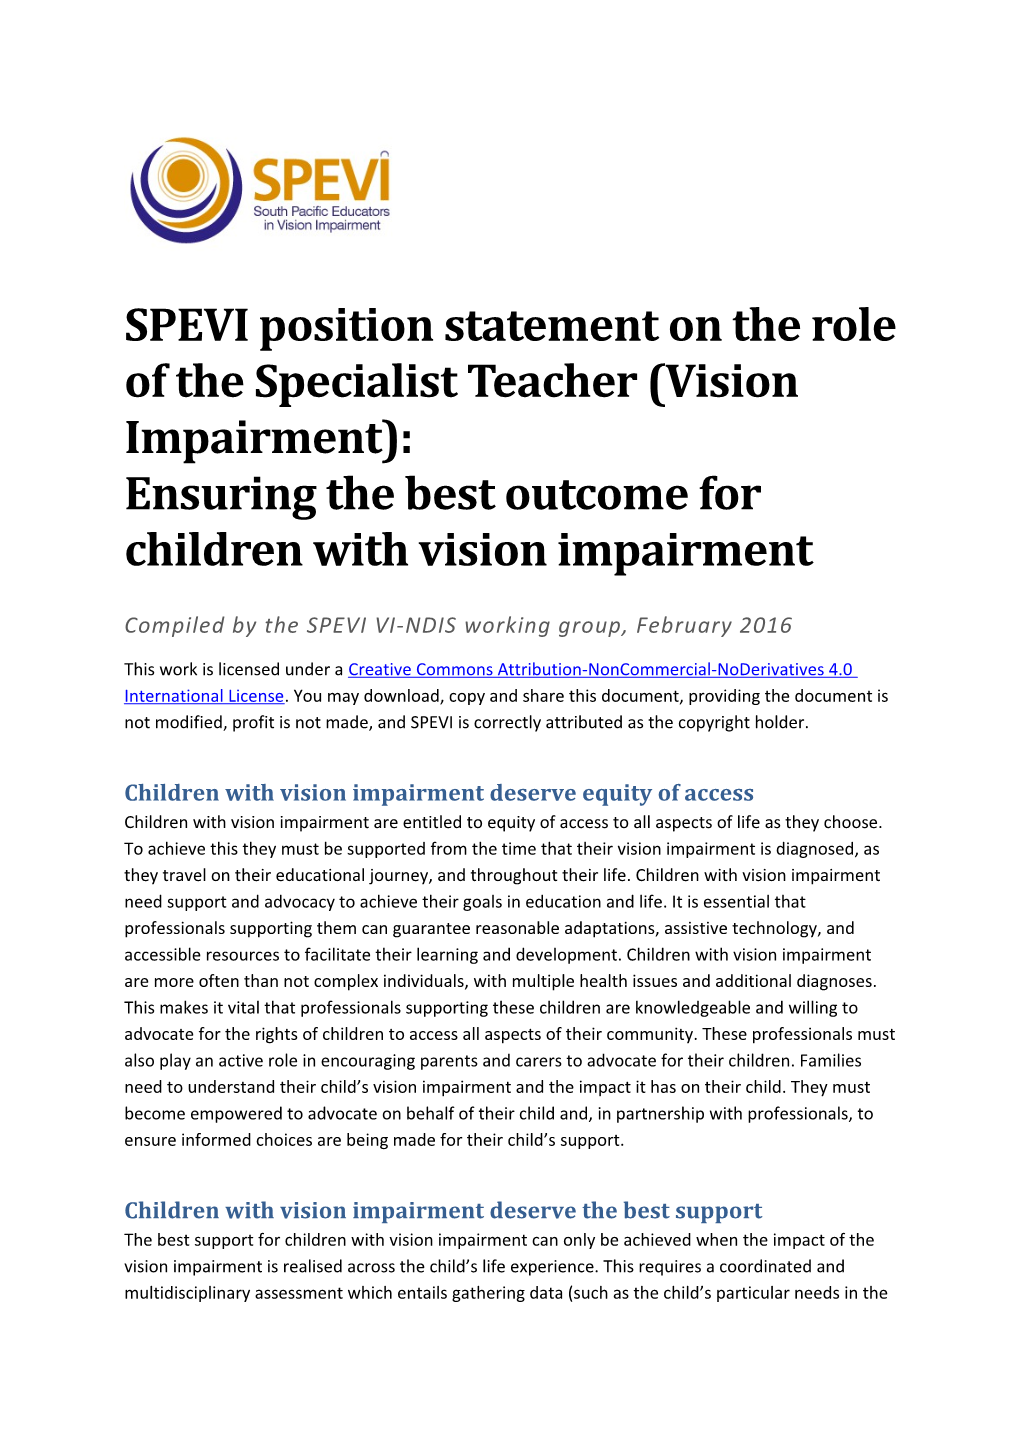 Children with Vision Impairment Deserve Equity of Access